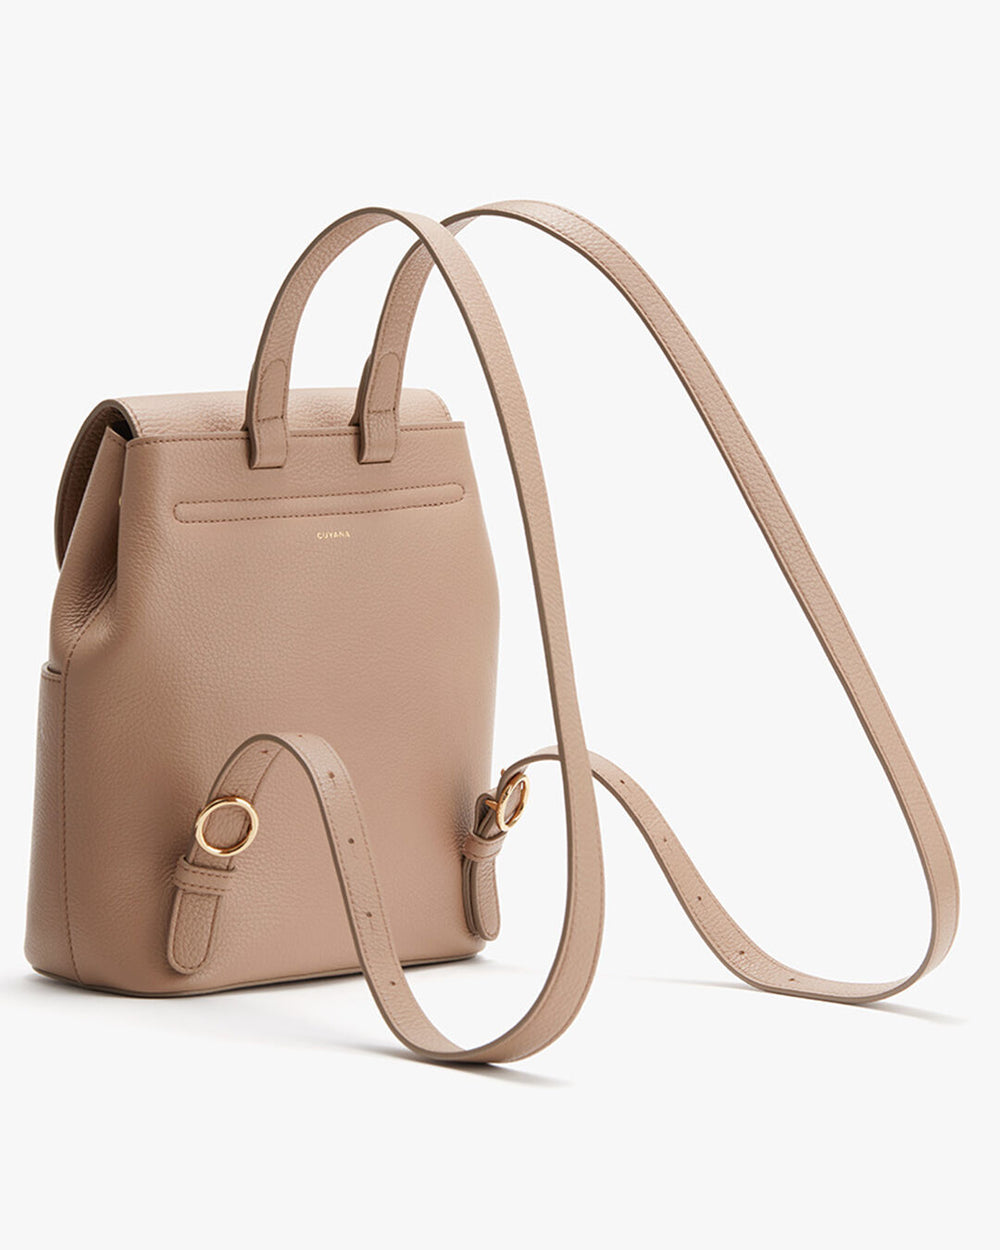 Small backpack with thin shoulder straps and a top handle.